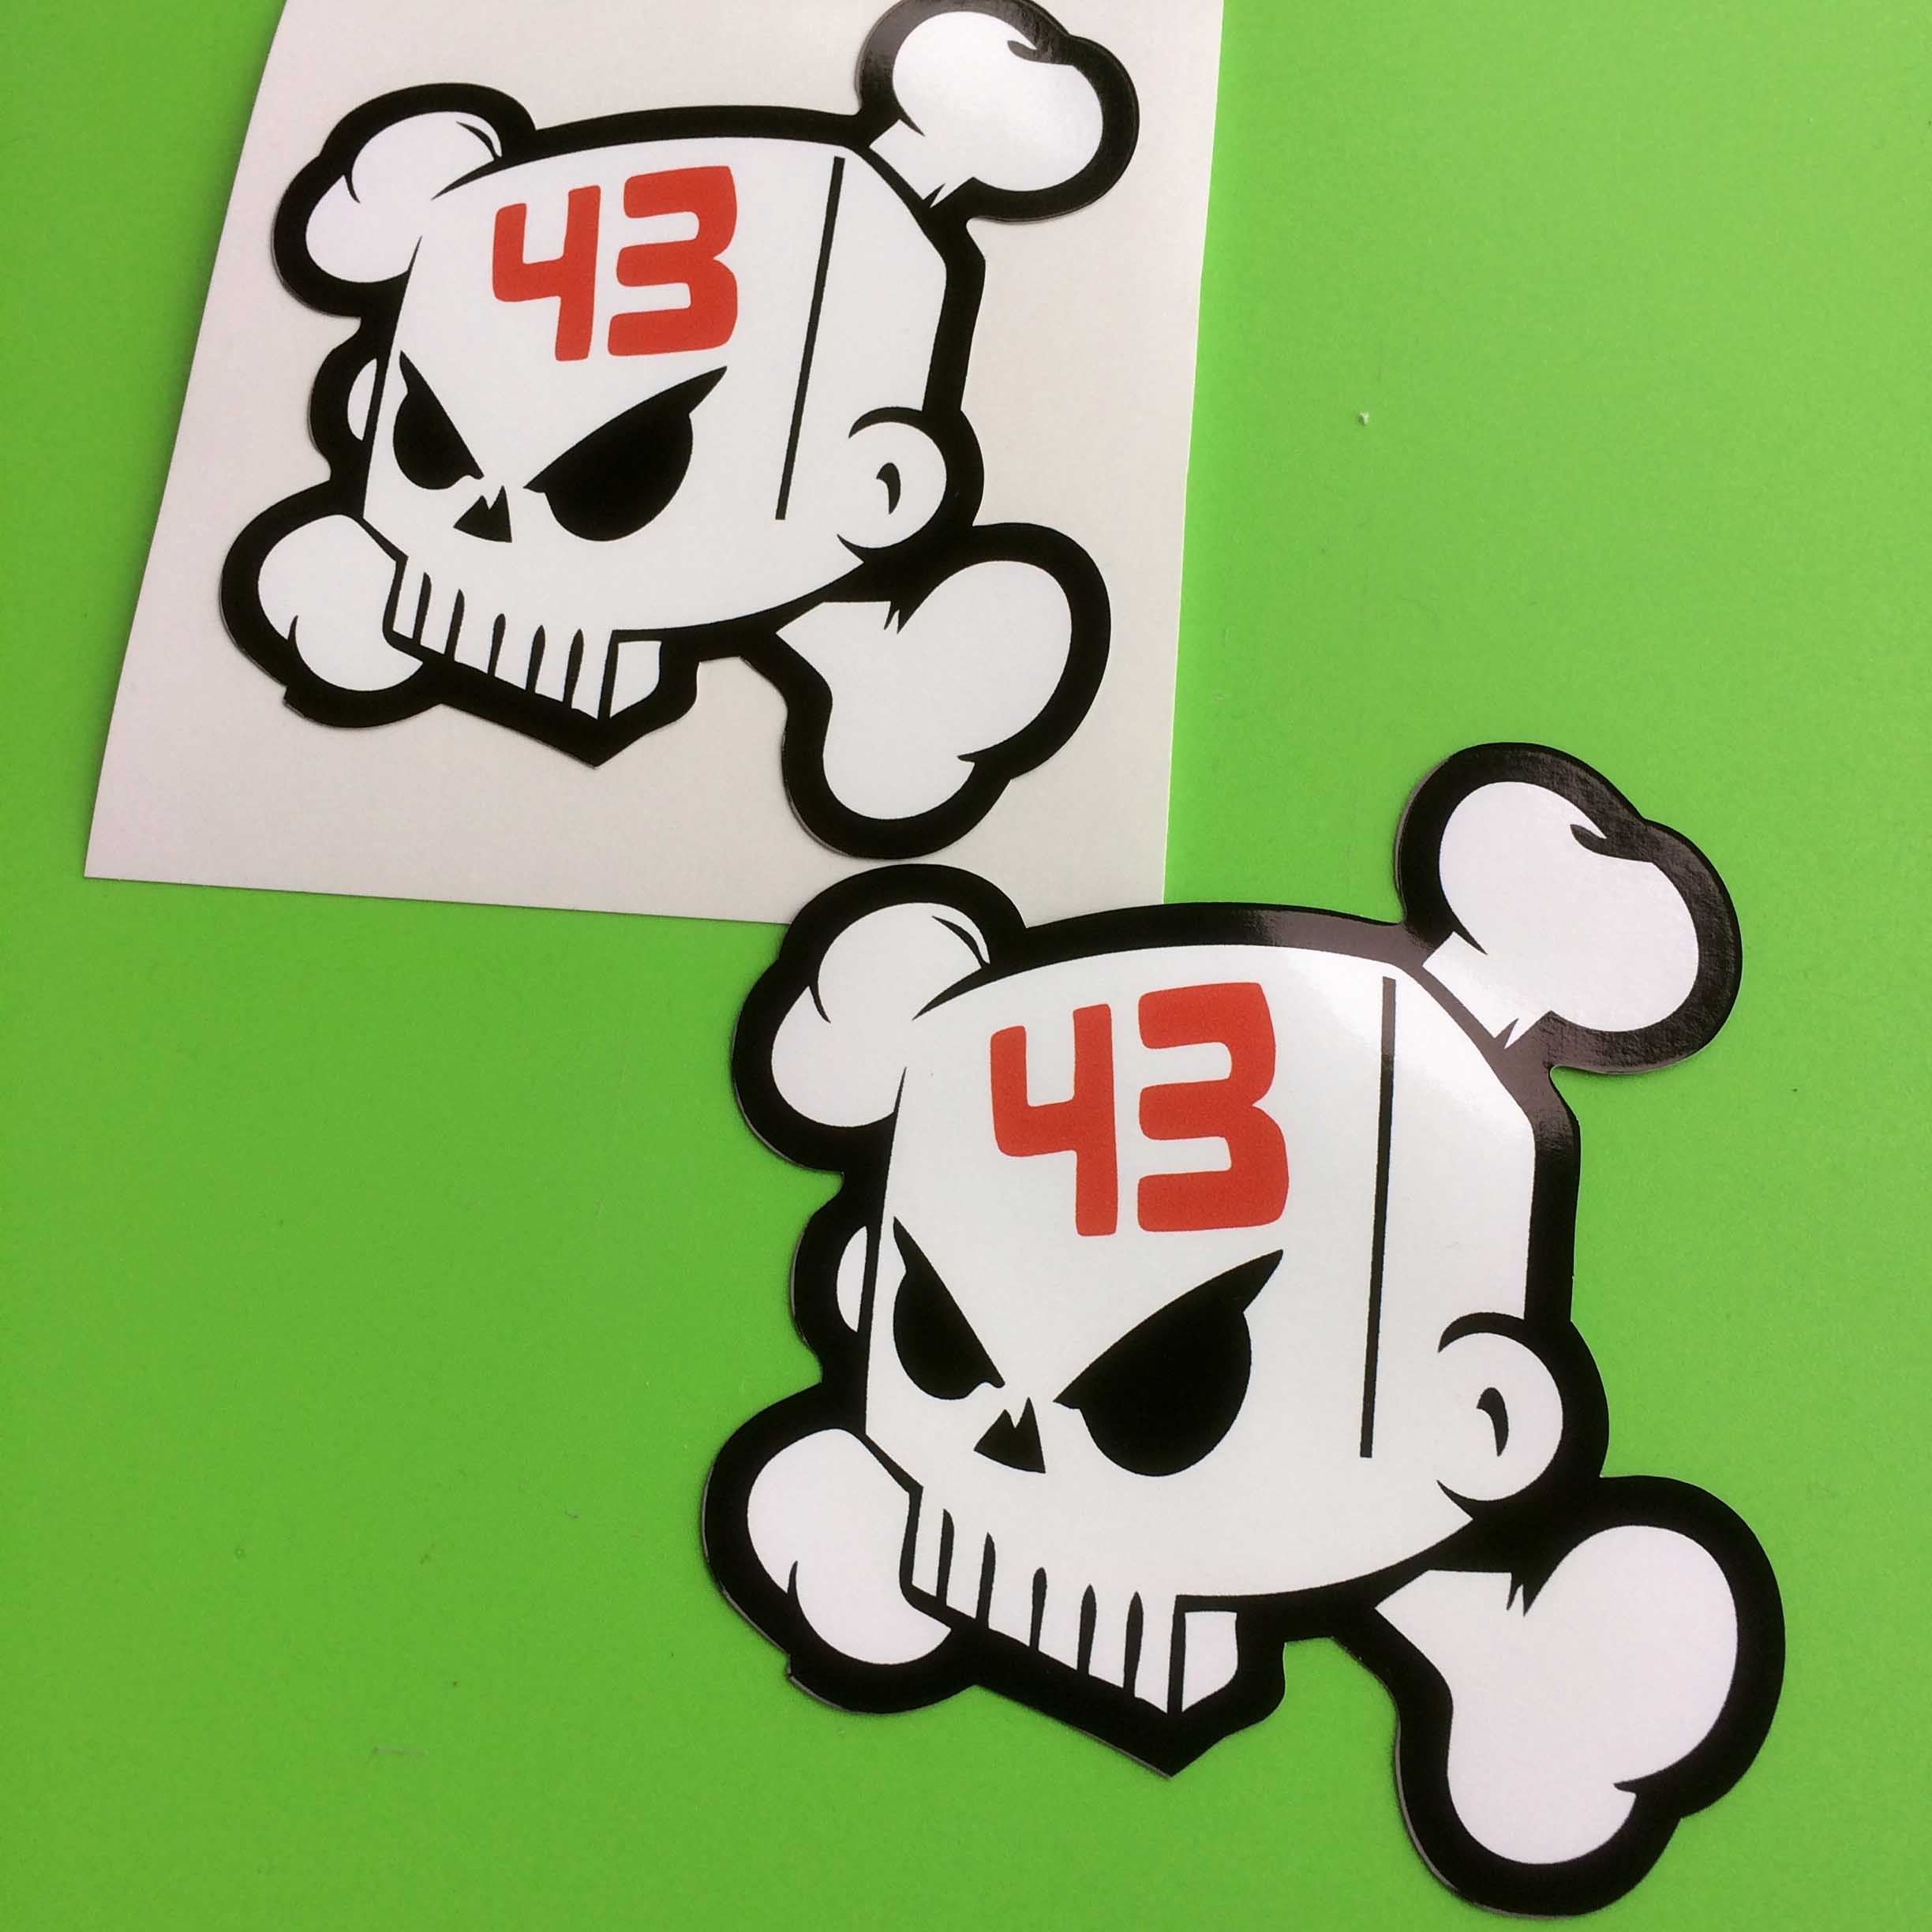 KEN BLOCK 45 SKULL, STICKER. A white skull and crossbones edged in black with the number 43 in red on the forehead.